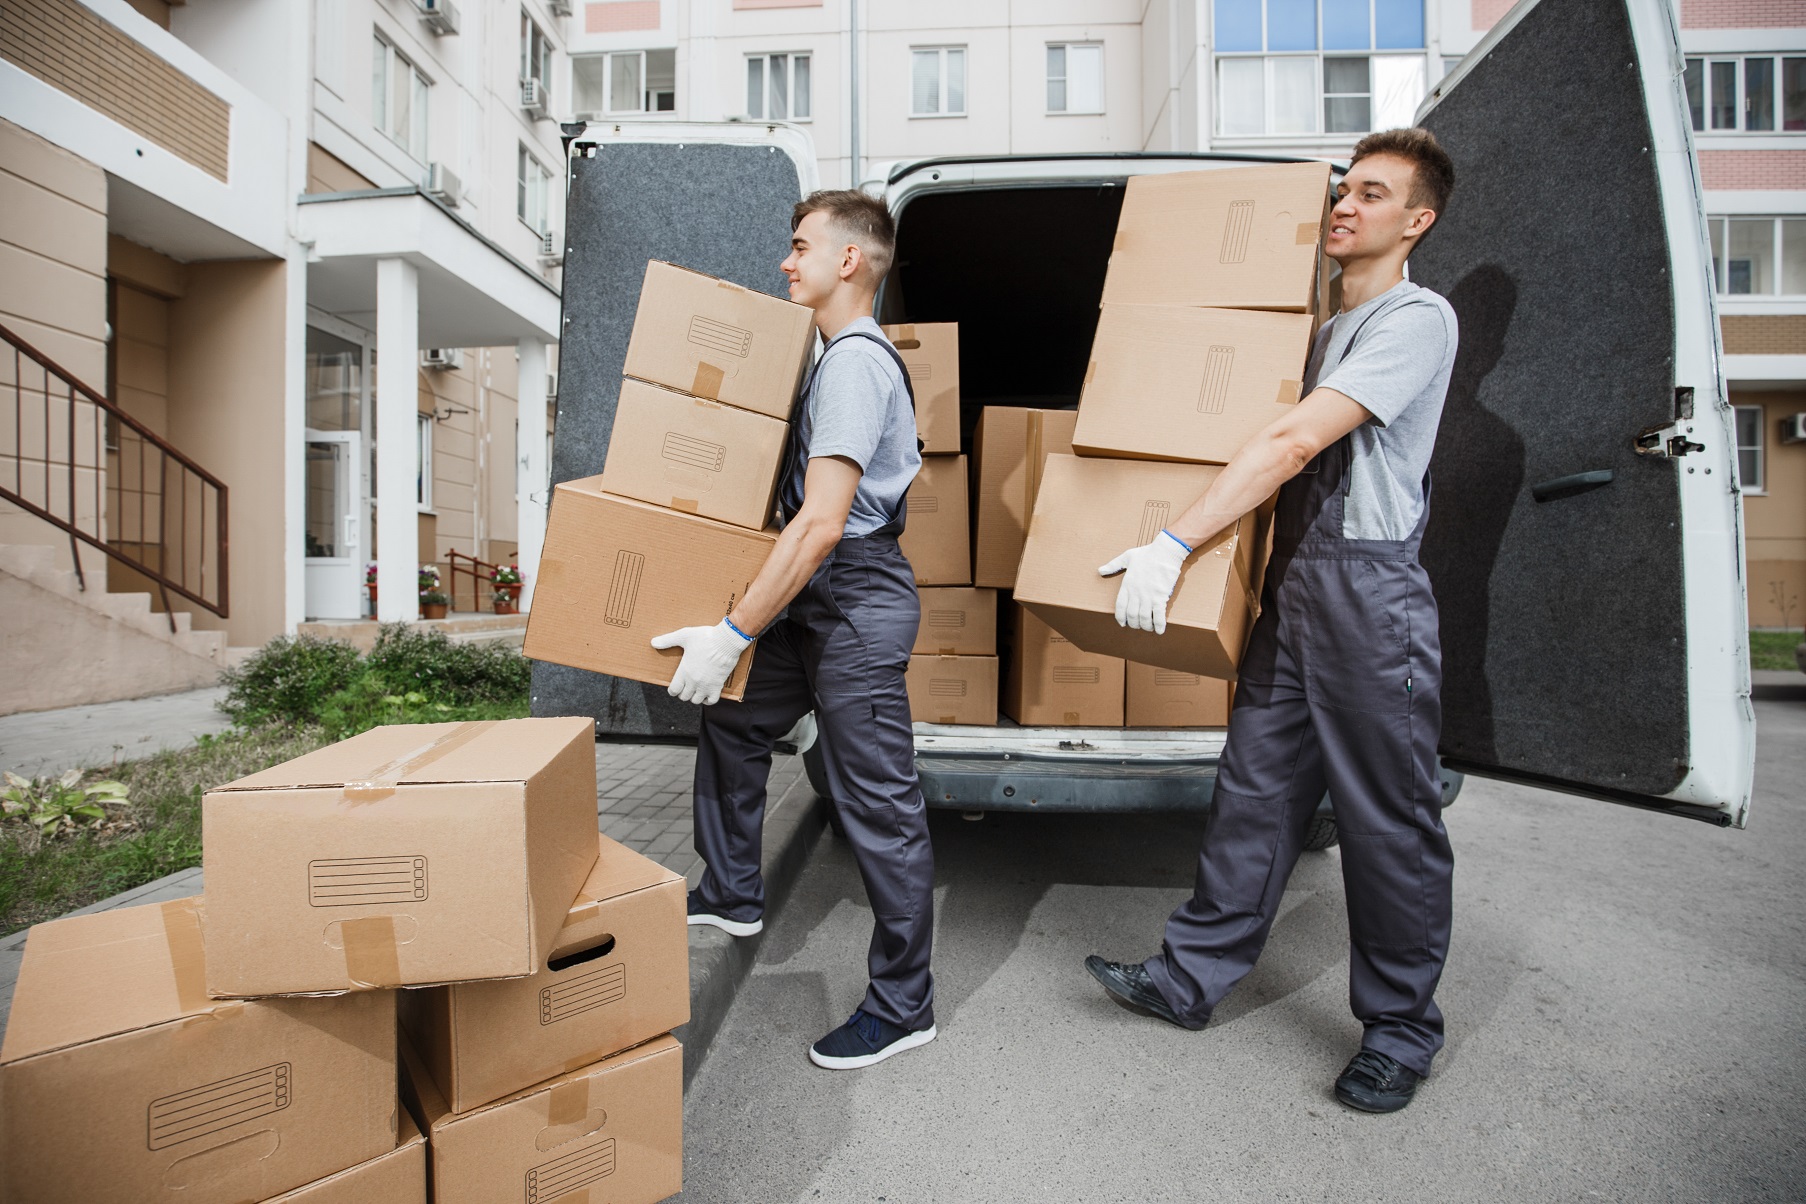 Two young handsome smiling workers wearing uniforms are unloading the van full of boxes. There is a block of flats in the background.